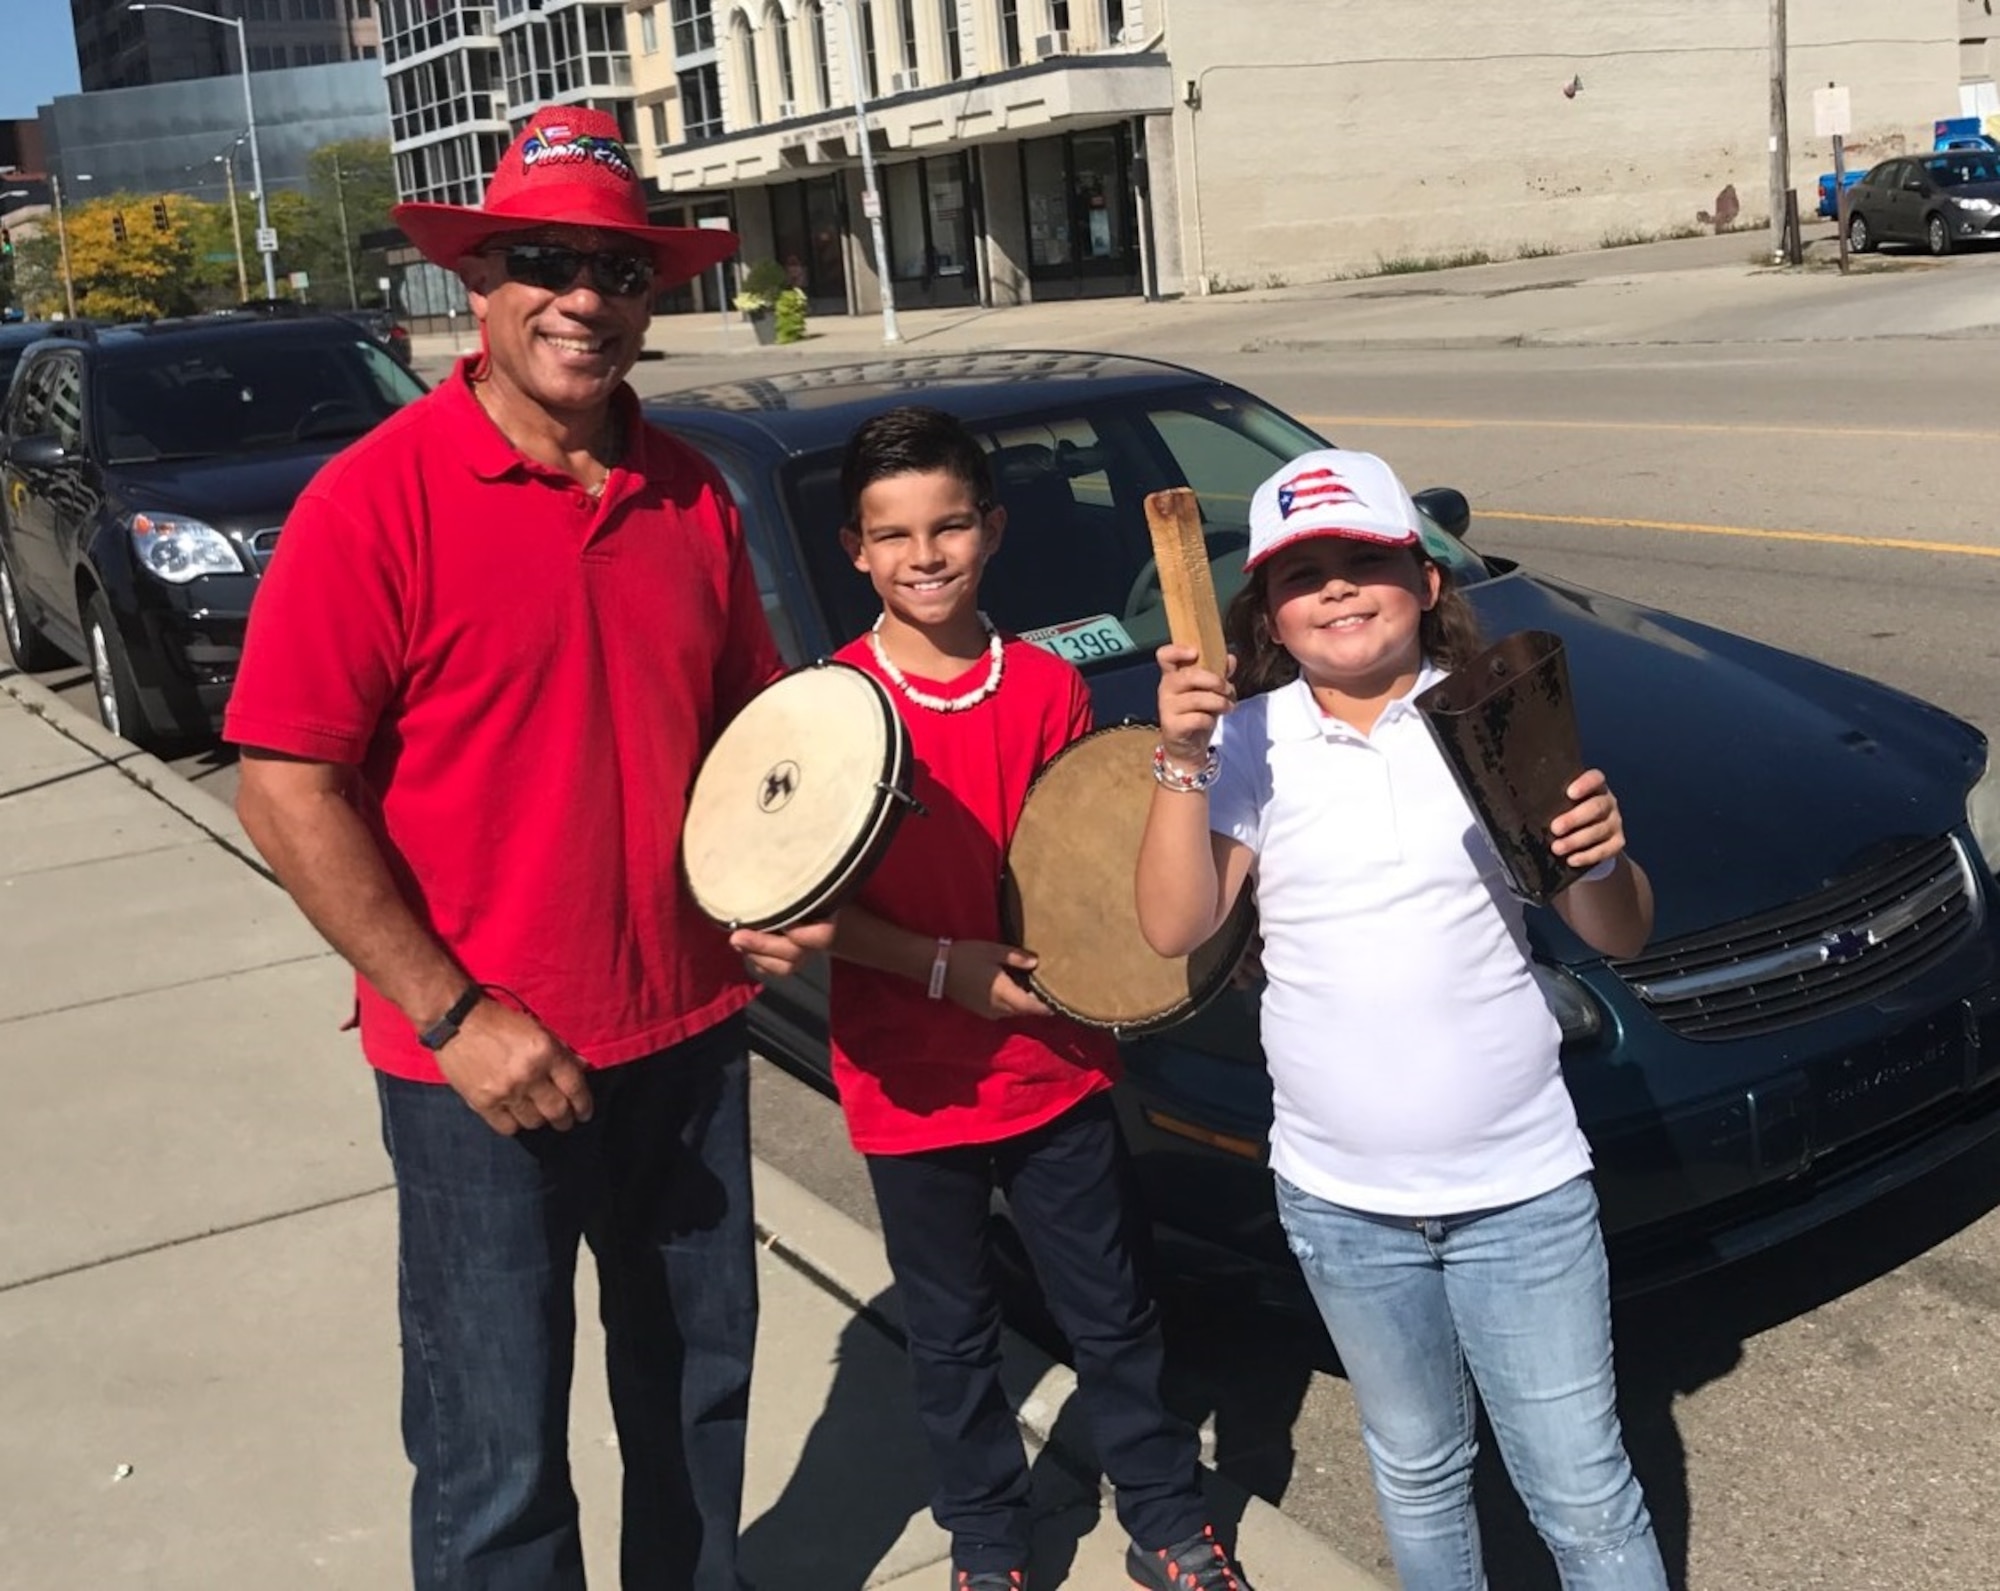 DAYTON, Ohio - Miguel Maldonado, Air Force Research Laboratory Fuels and Energy branch chief, poses with his grandchildren prior to performing at the 7th Annual Hispanic Heritage Festival & Parade in Dayton, Ohio Sept.16, 2017. Maldonado said he believes that mentoring, both cultural and profession, is everyone’s responsibility, but especially for those who have seen success in life. (Courtesy photo/Miguel Maldonado)